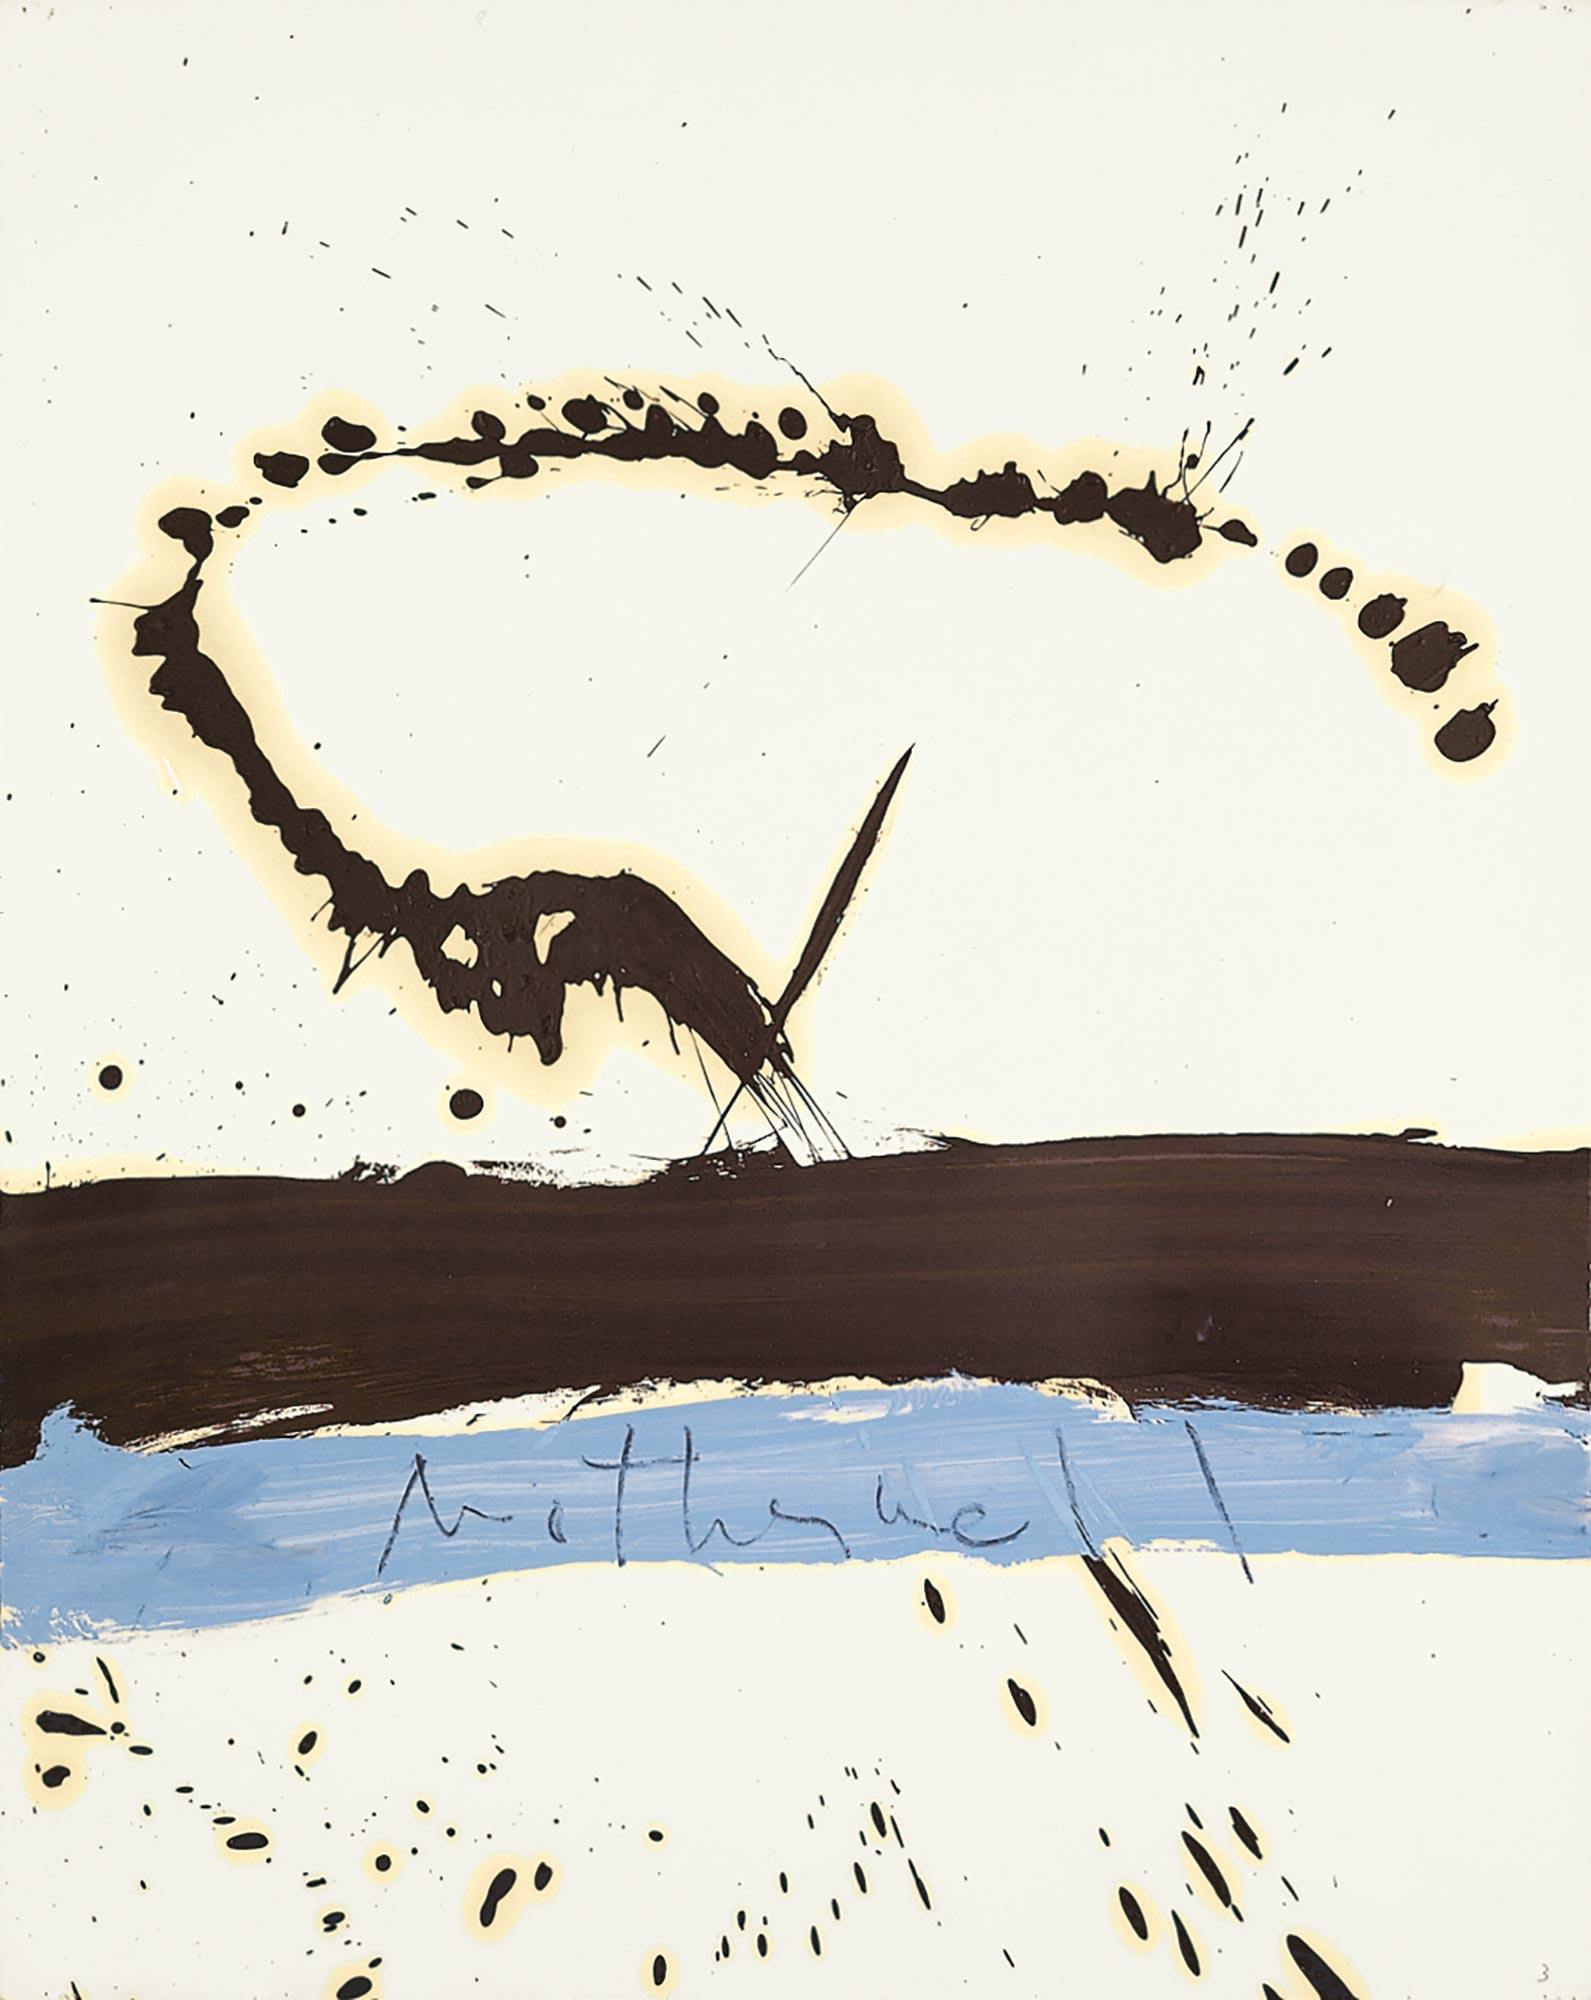 An abstract painting of smeared and splashed blue and brown paint on a white ground